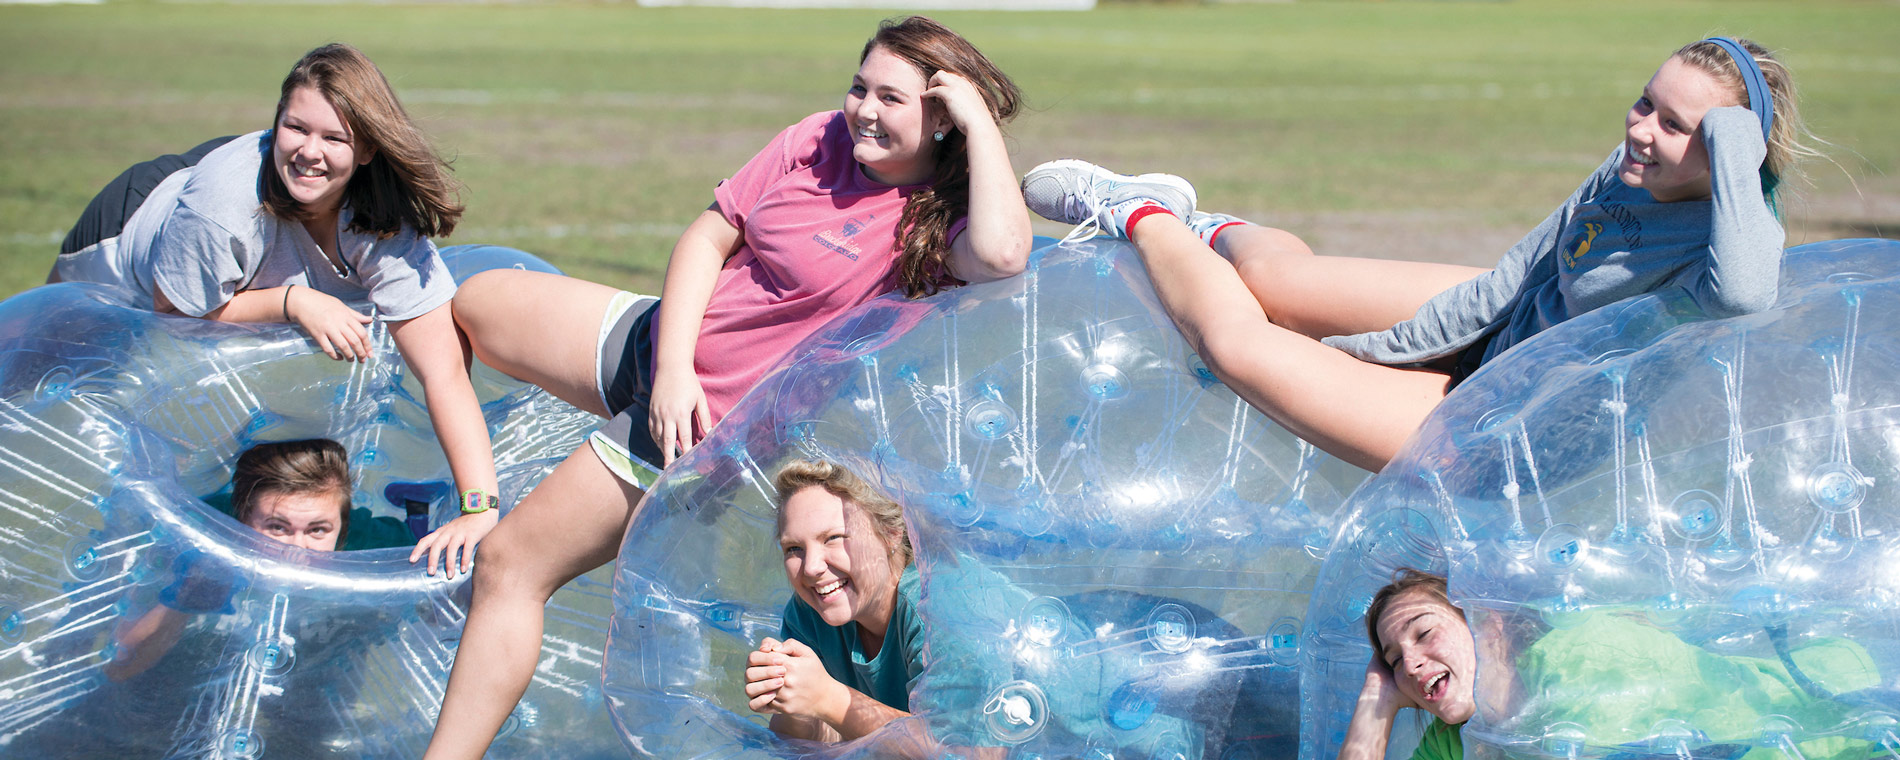 Students sitting inflatable bubbles on a field